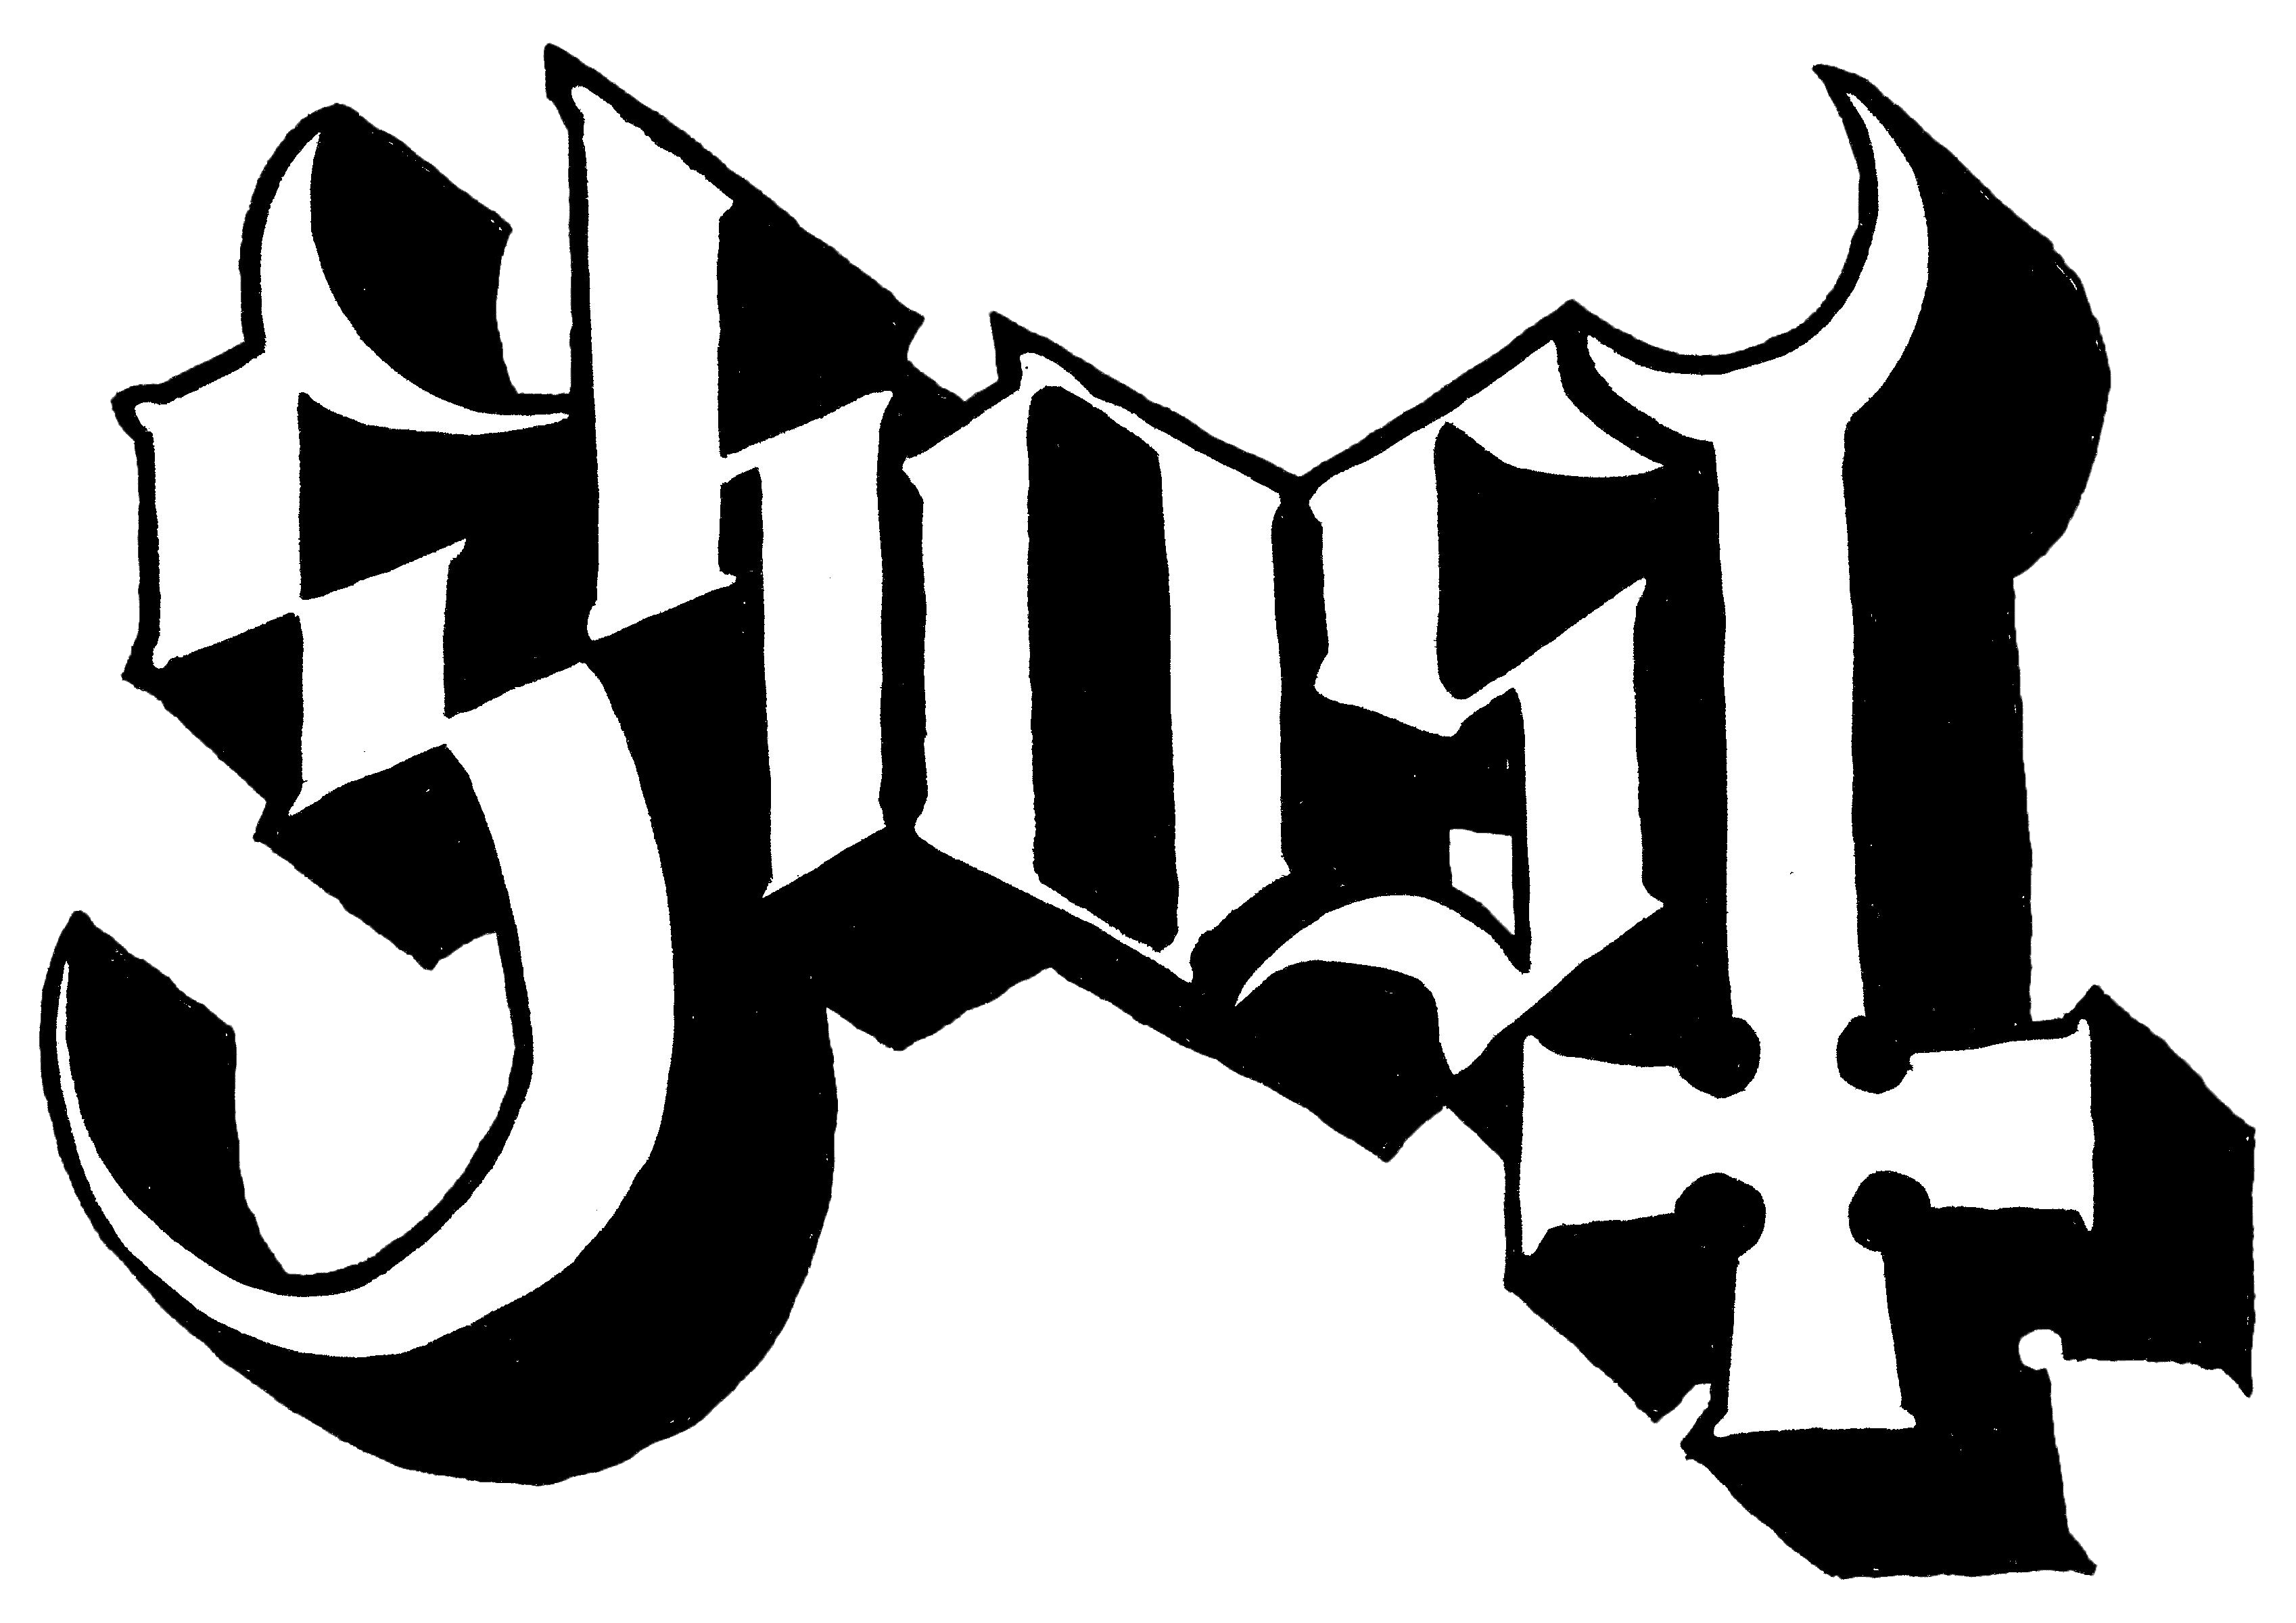 Ghost_logo_HiRes.png (3395×2